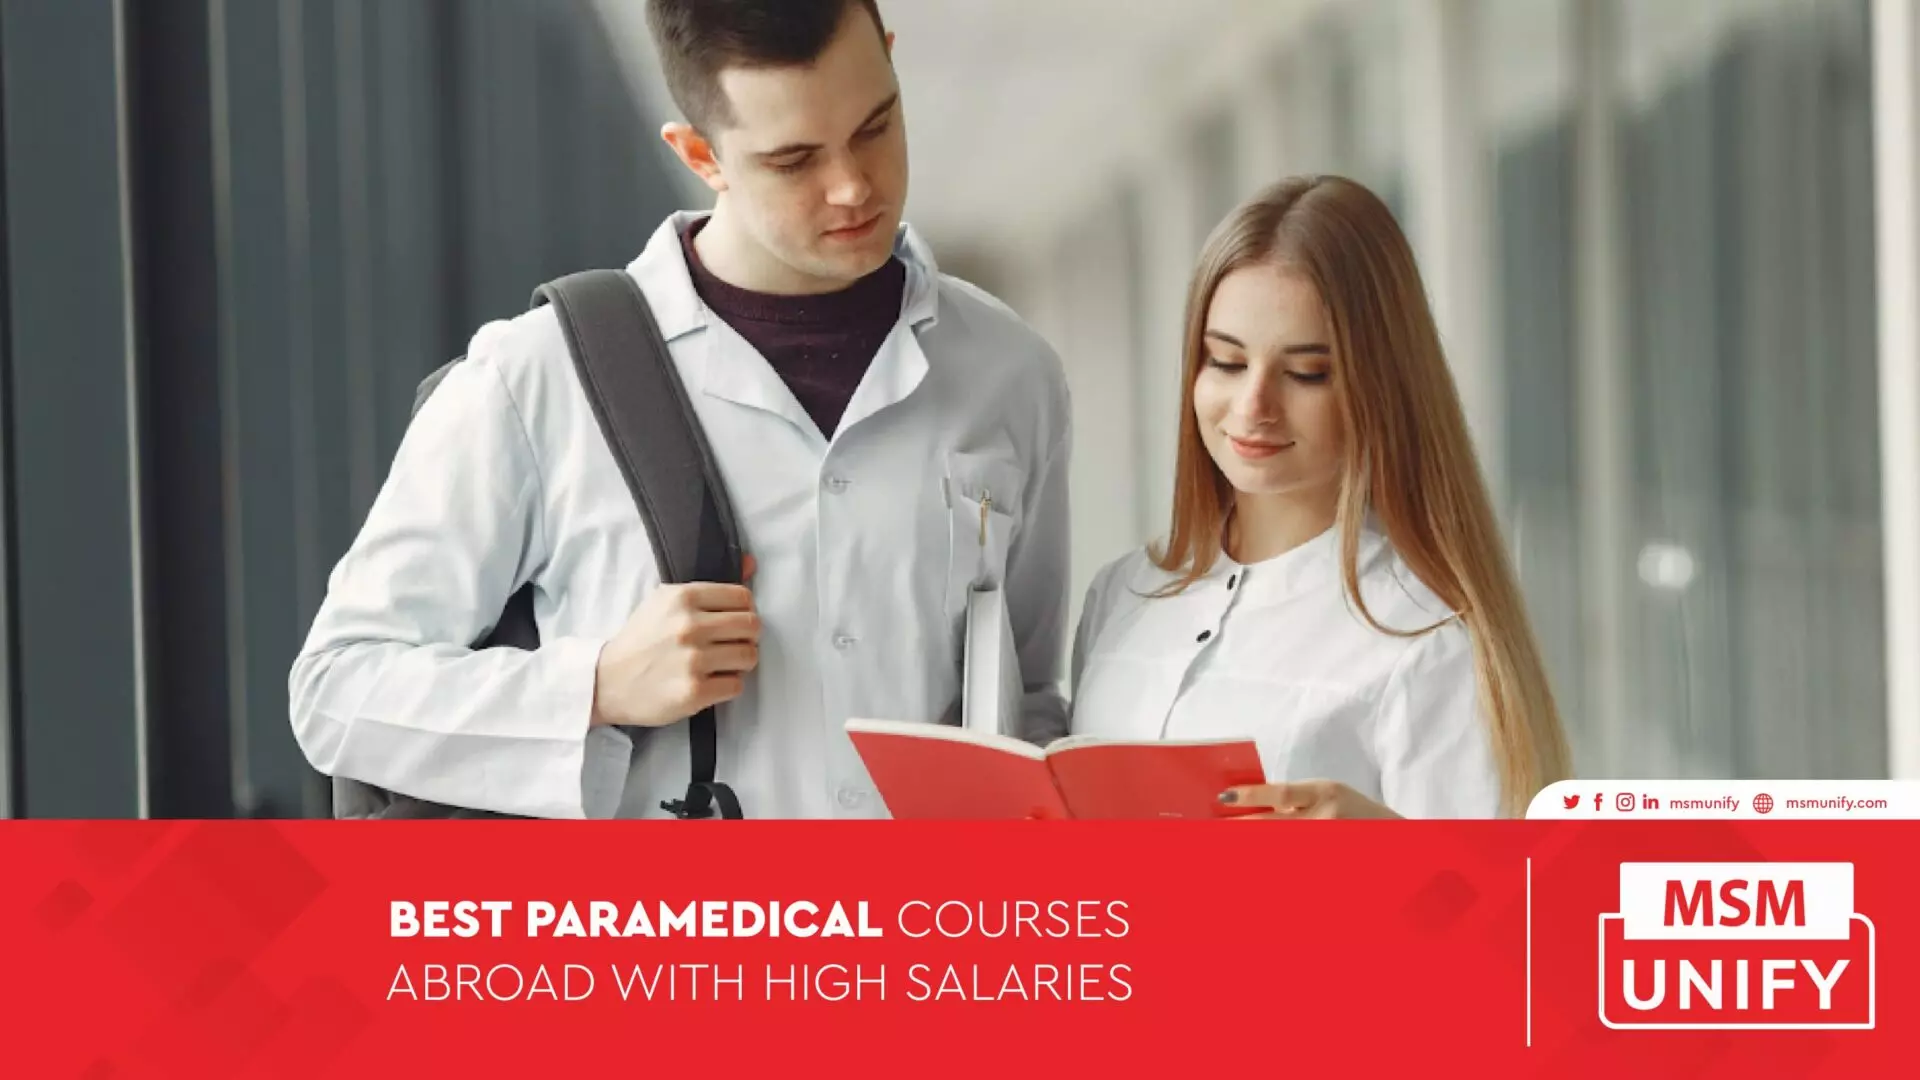 Best Paramedical Courses Abroad with High Salaries